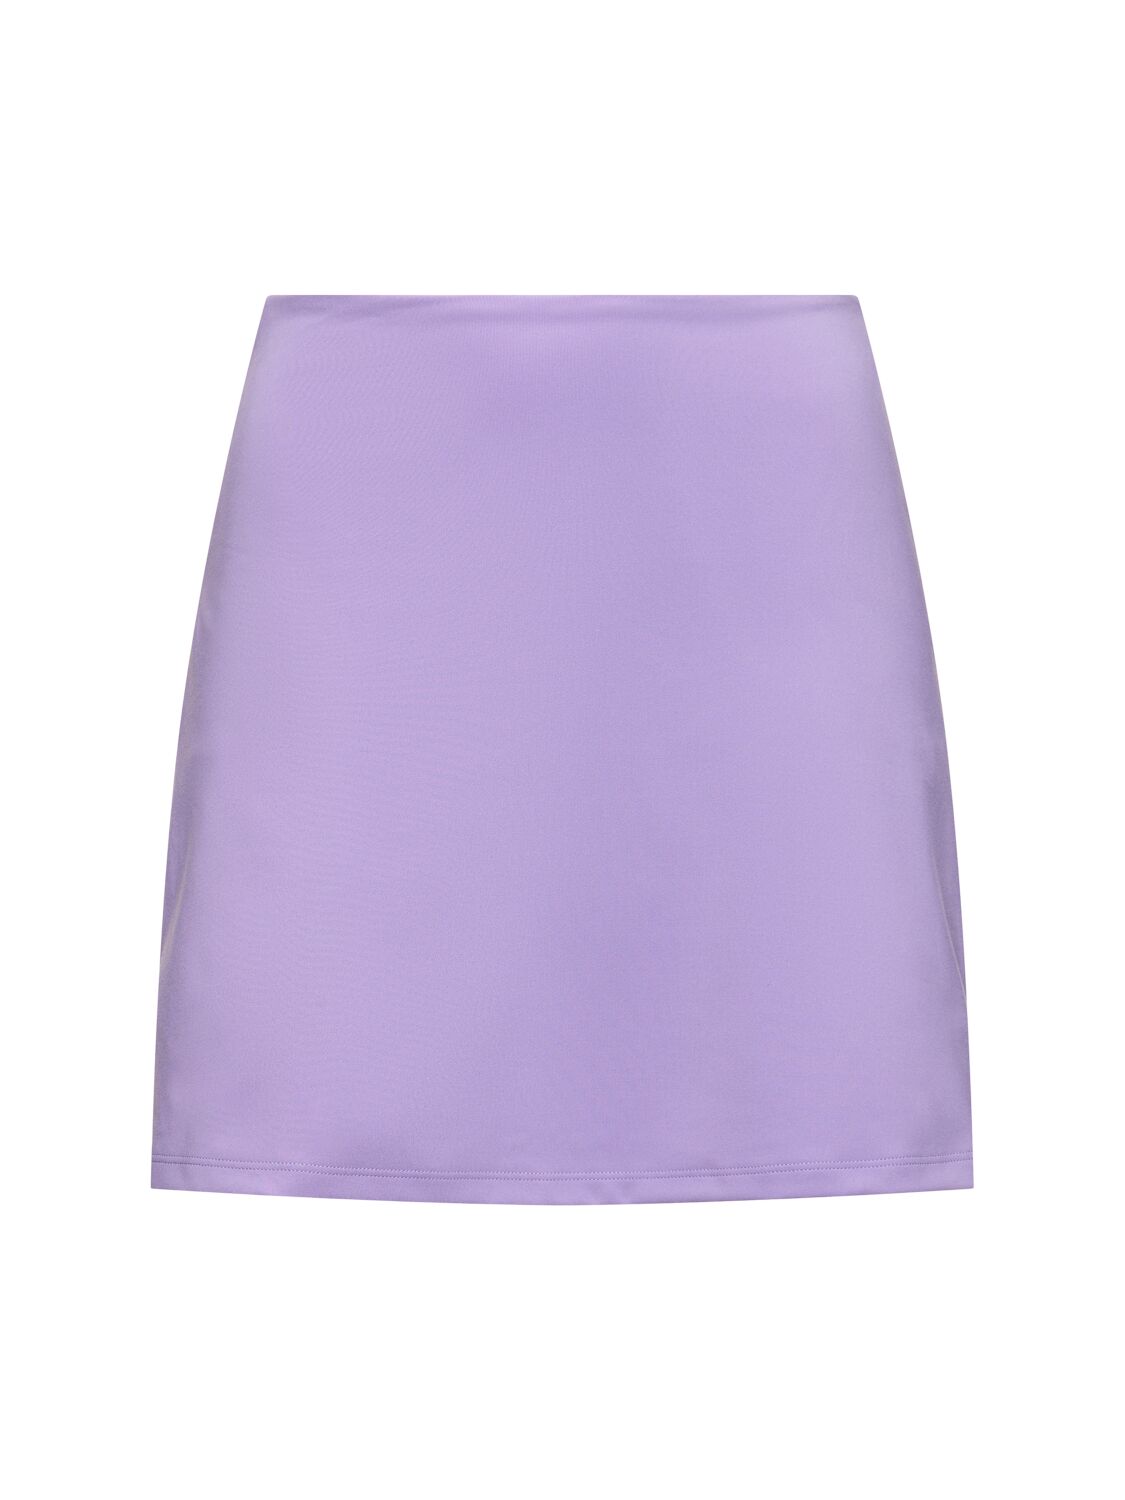 Girlfriend Collective The High Rise Skort In Violet